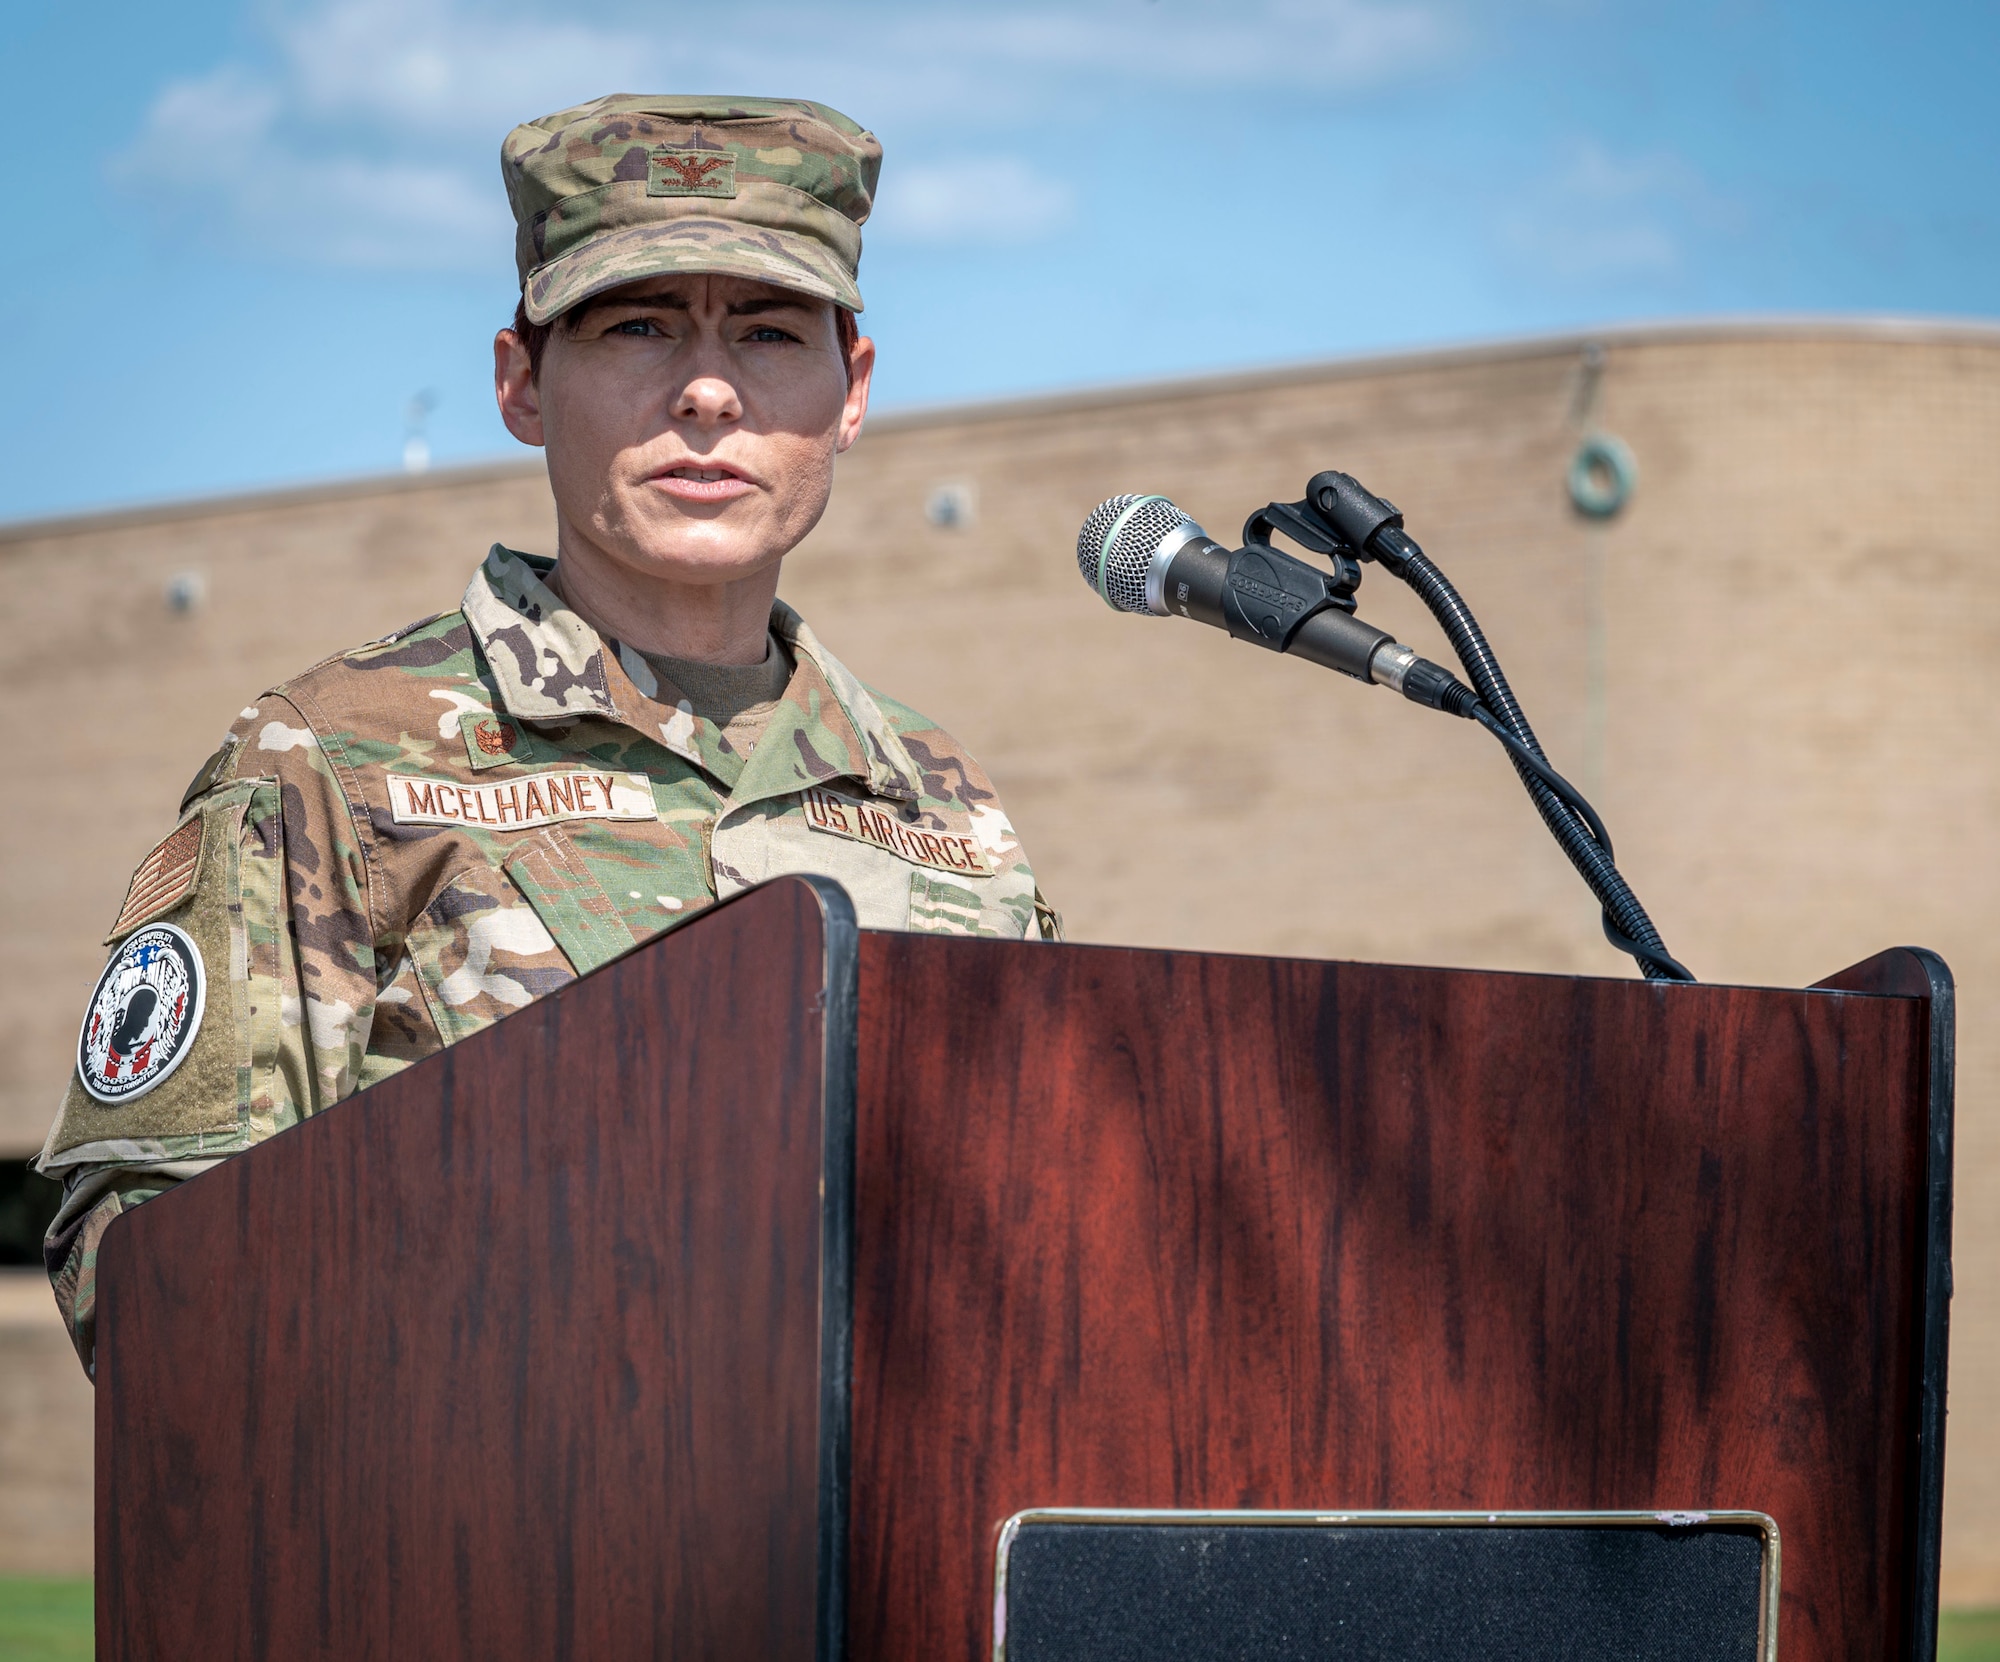 Col. Tammy McElhaney, 4th Mission Support Group commander, gives closing remarks for the final ceremony during POW/MIA Remembrance Week at Goldsboro, North Carolina, September 15, 2022. During POW/MIA week, Seymour Johnson honored brothers and sisters in arms through multiple events including a ruck march, a veterans round table, a memorial ride, closing ceremony and a 24-hour vigil.  (U.S. Air Force photo by Airman 1st Class Sabrina Fuller)